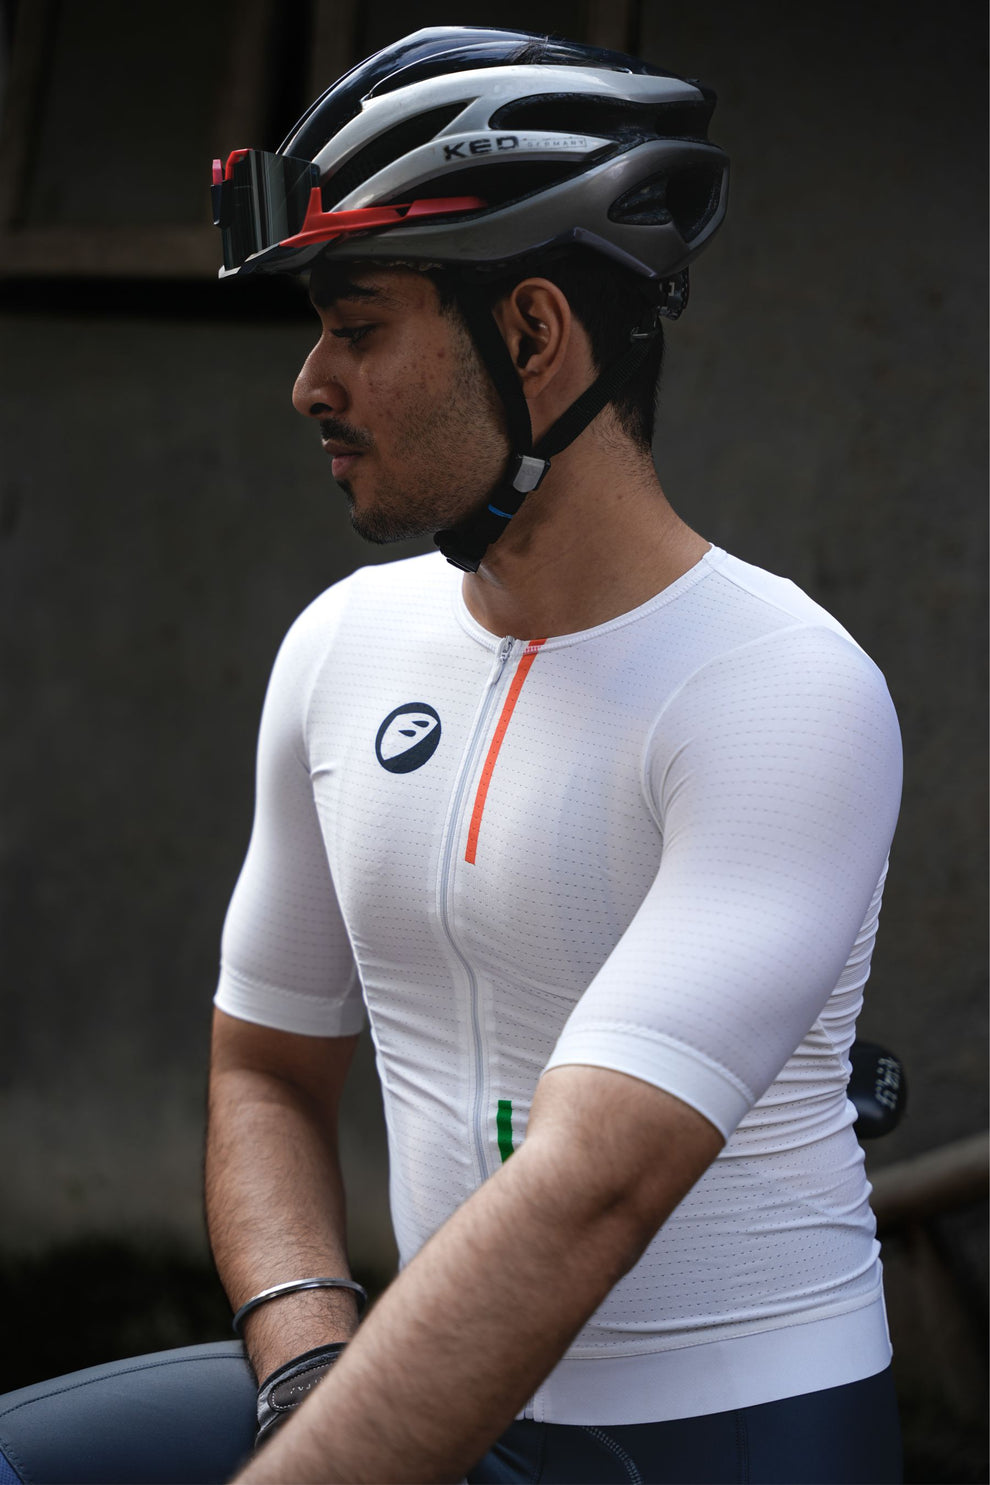 Apace Podium Fit Men's Cycling Jersey (Bharat)